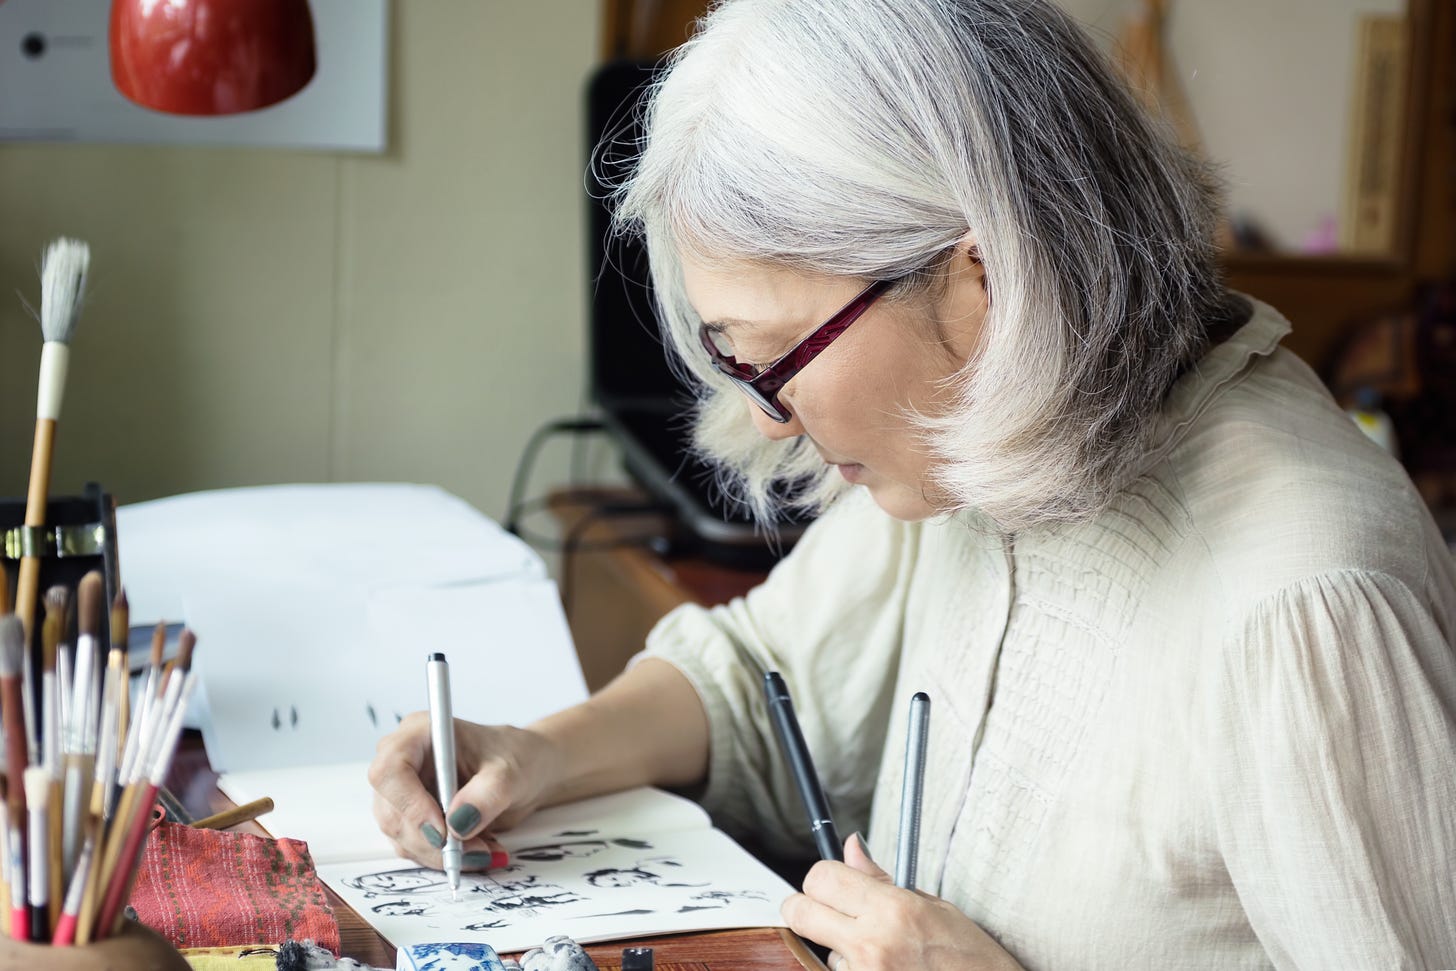 An older Asian woman drawing at a desk.